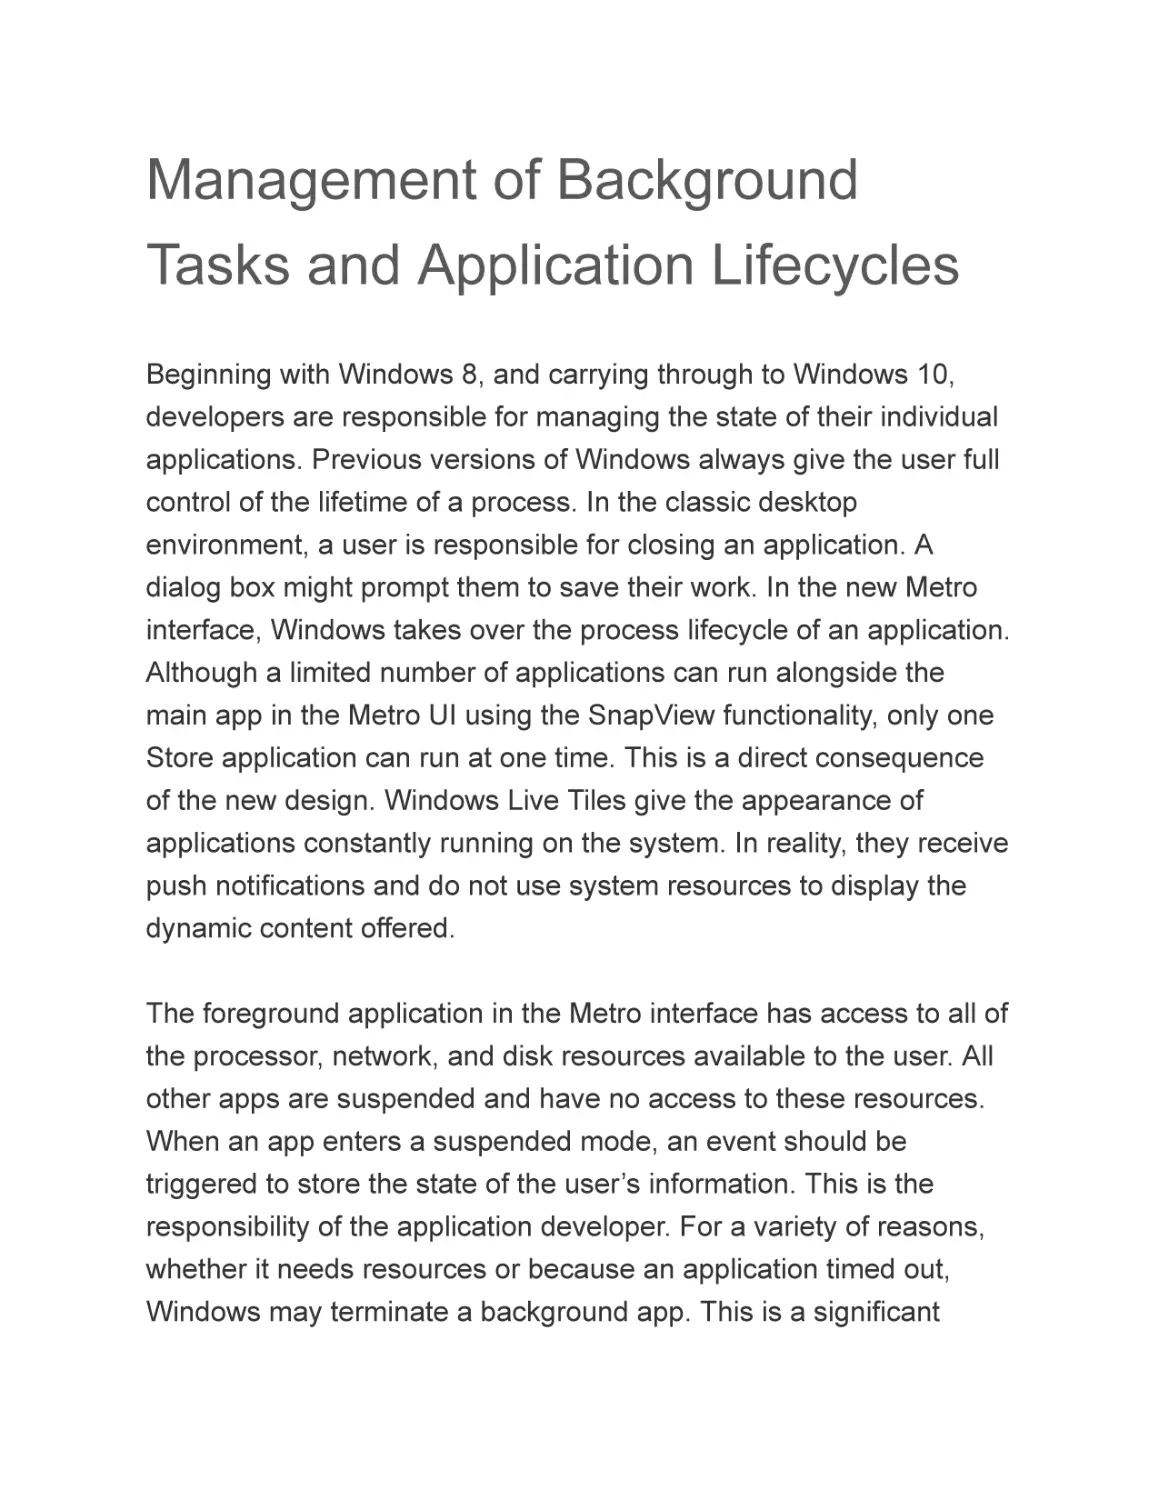 Management of Background Tasks and Application Lifecycles